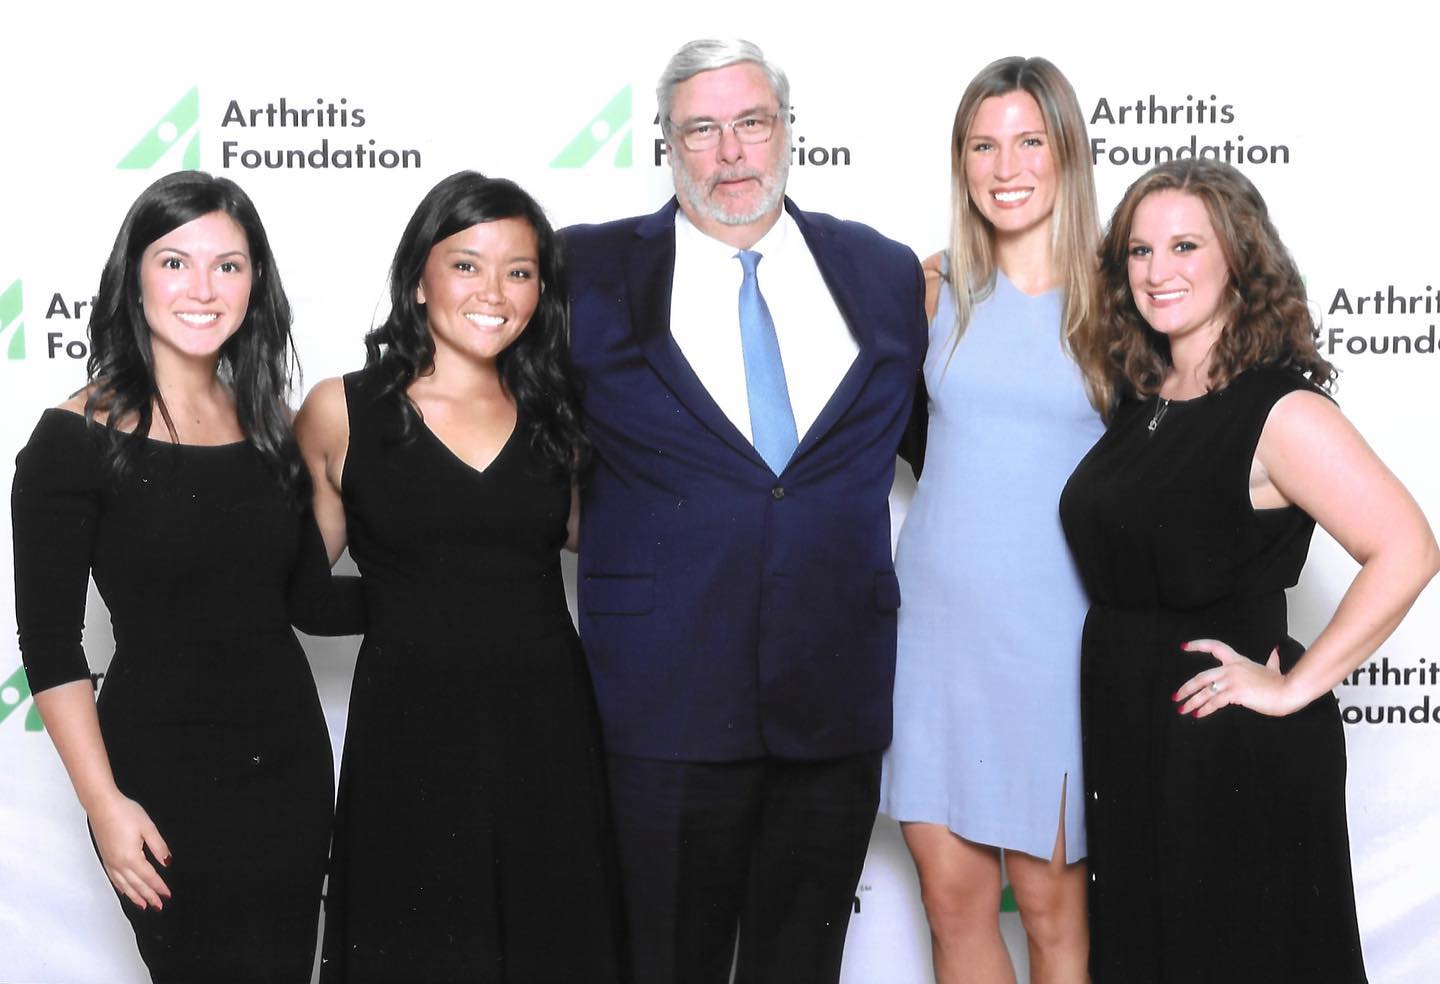 2019 Arthritis Foundation Evening of Honors with Caitlin Coriddi, Beth Pelletier, Mike Sportini, Brianne O'Connor, and Christina Gioeli